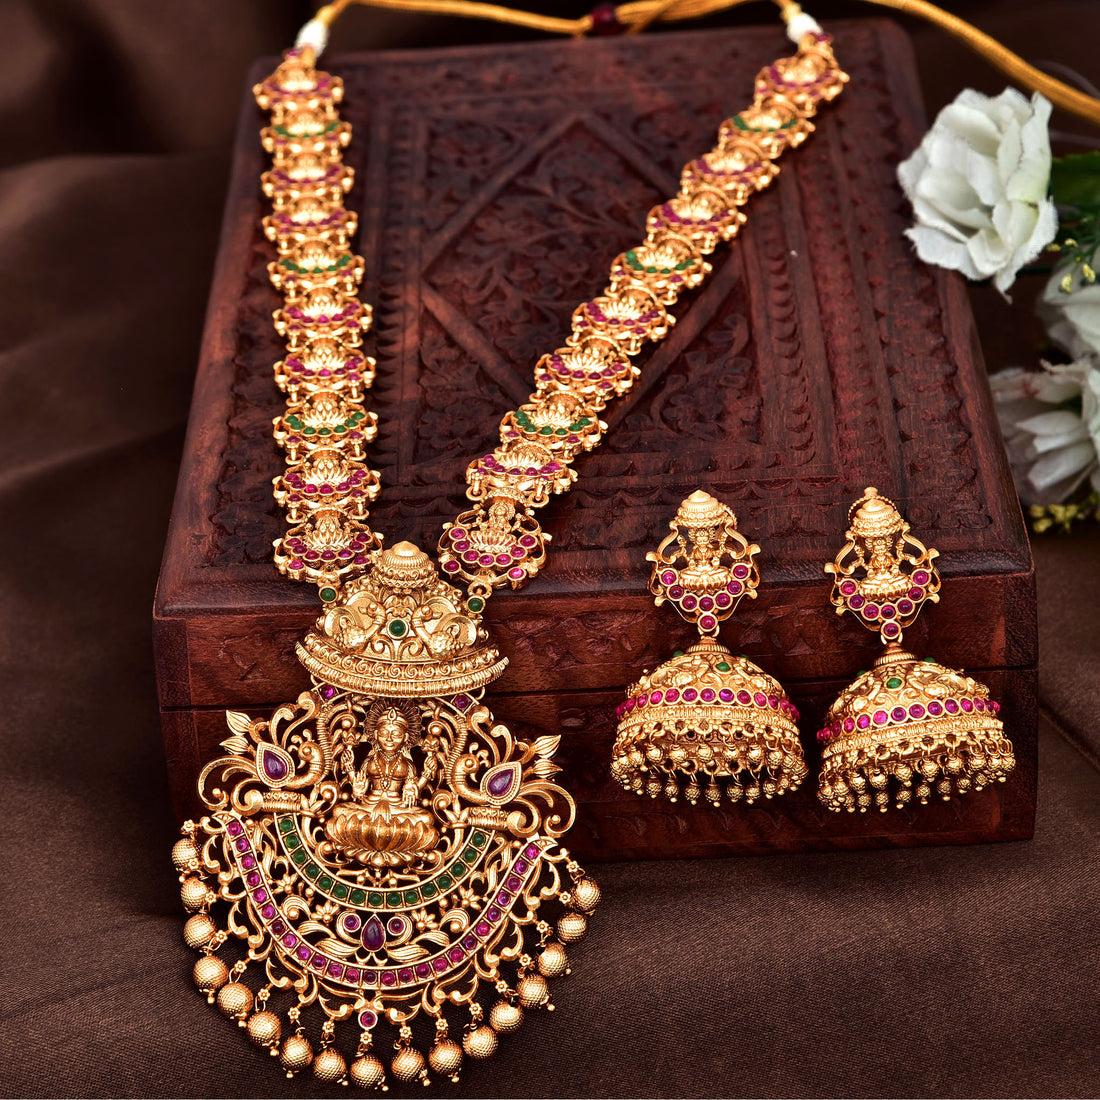 Gifting Ideas for the Ladies This Diwali: Jewellery Edition